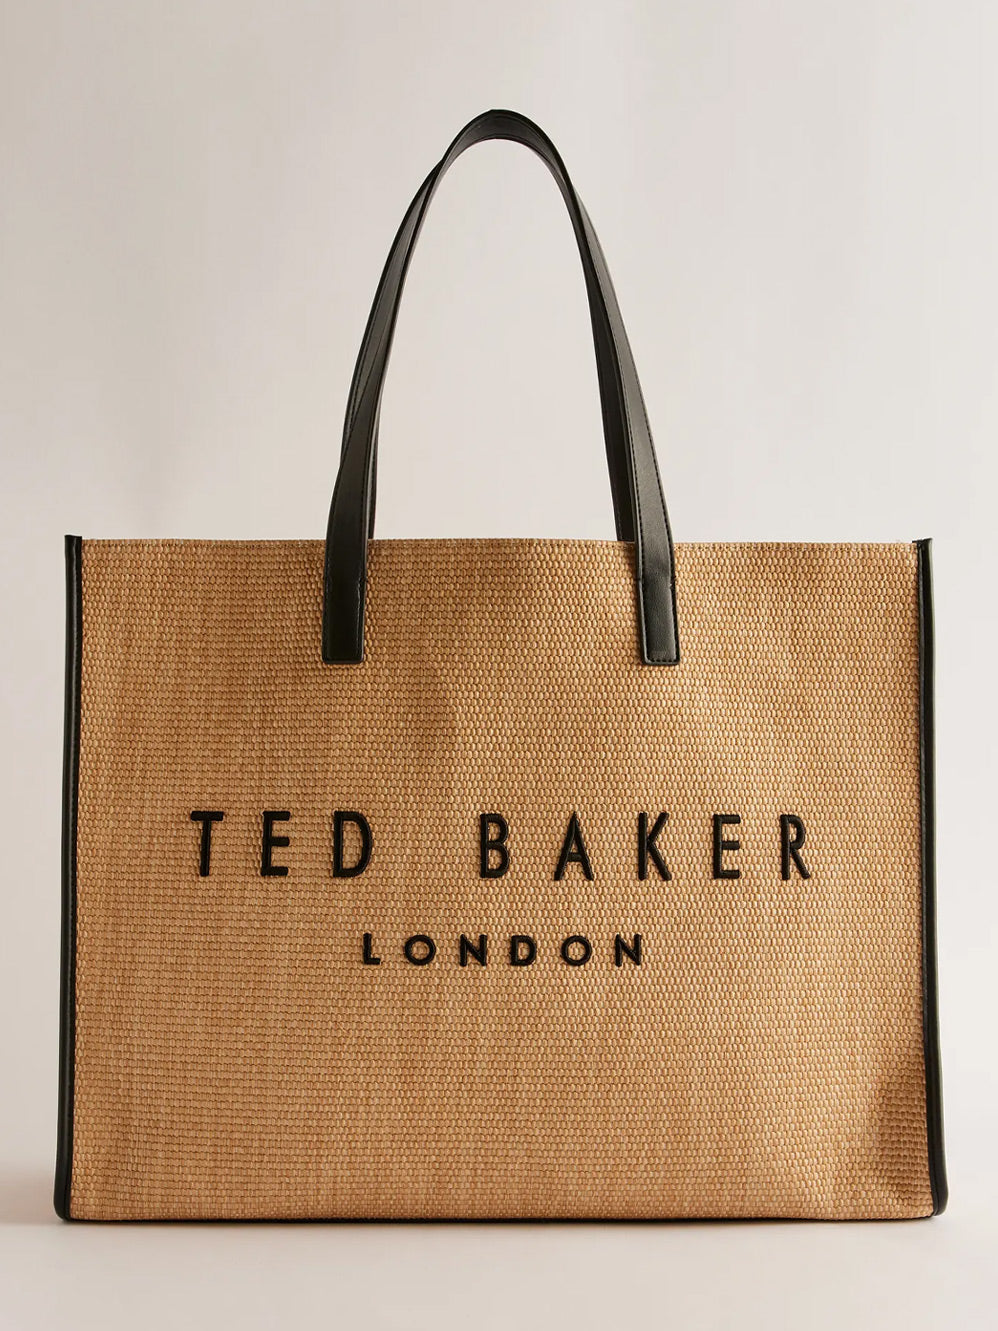 TED BAKER PALLMER LARGE WOVEN TOTE BAG